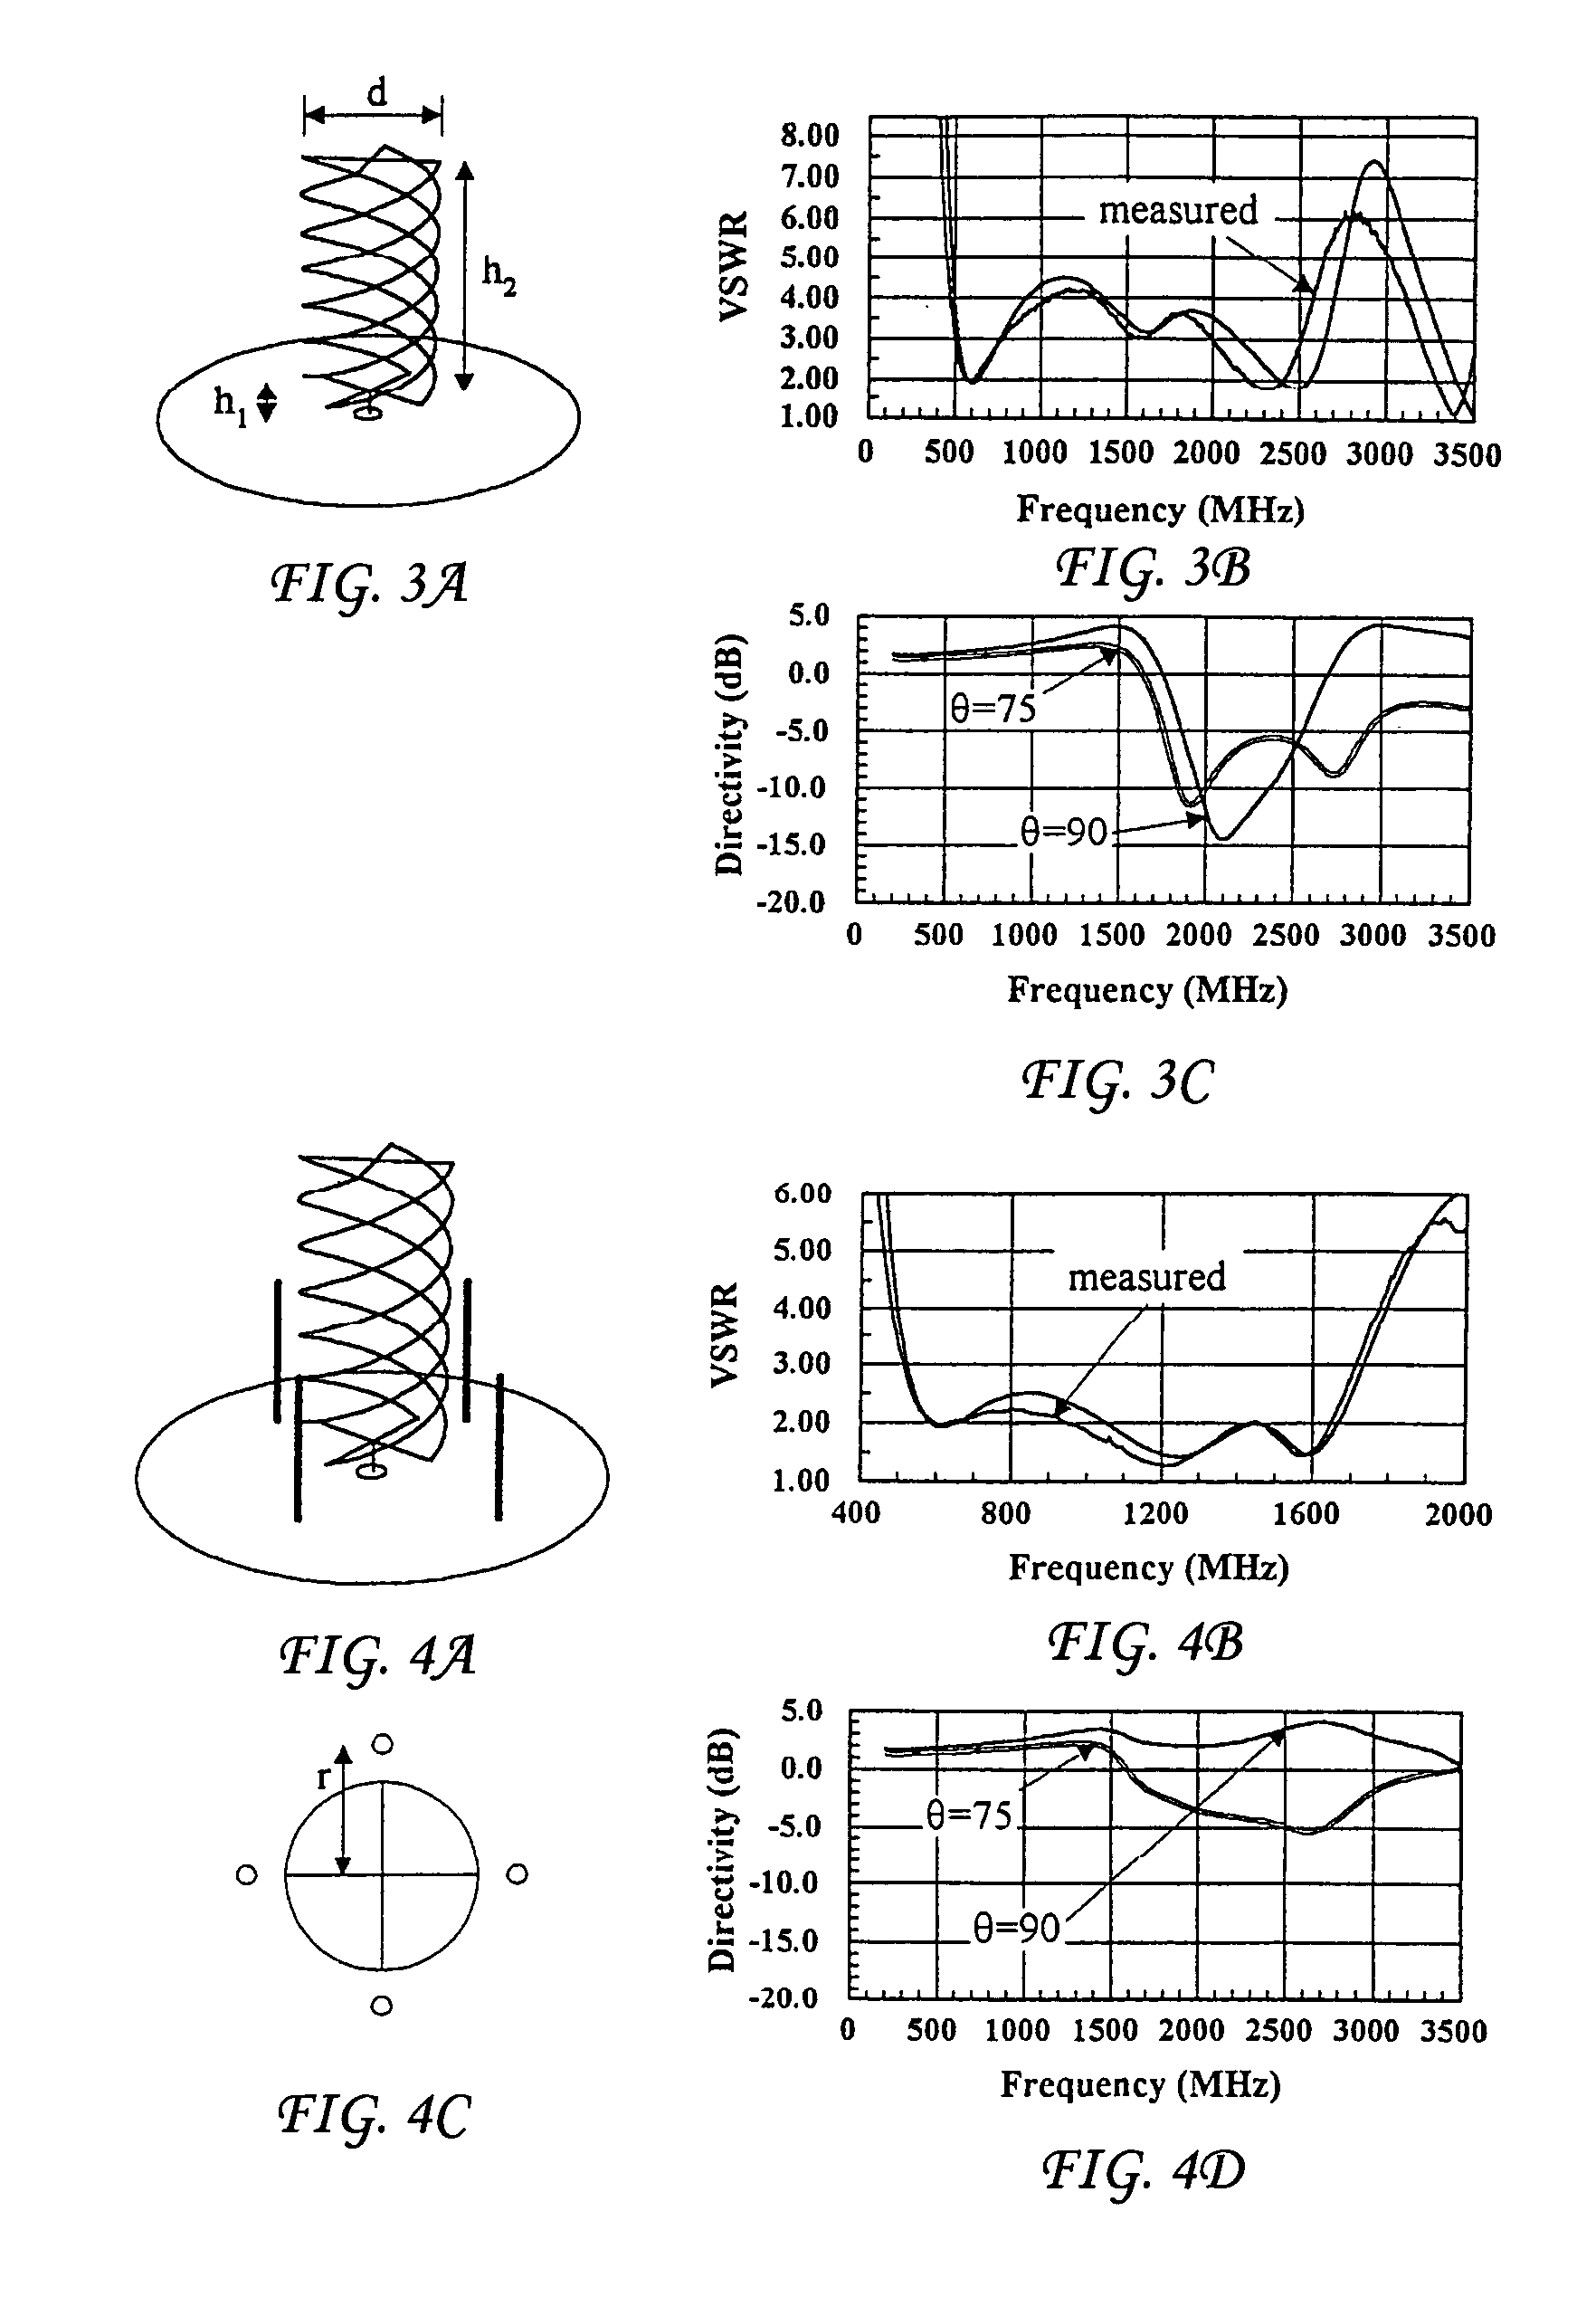 Designs for wide band antennas with parasitic elements and a method to optimize their design using a genetic algorithm and fast integral equation technique